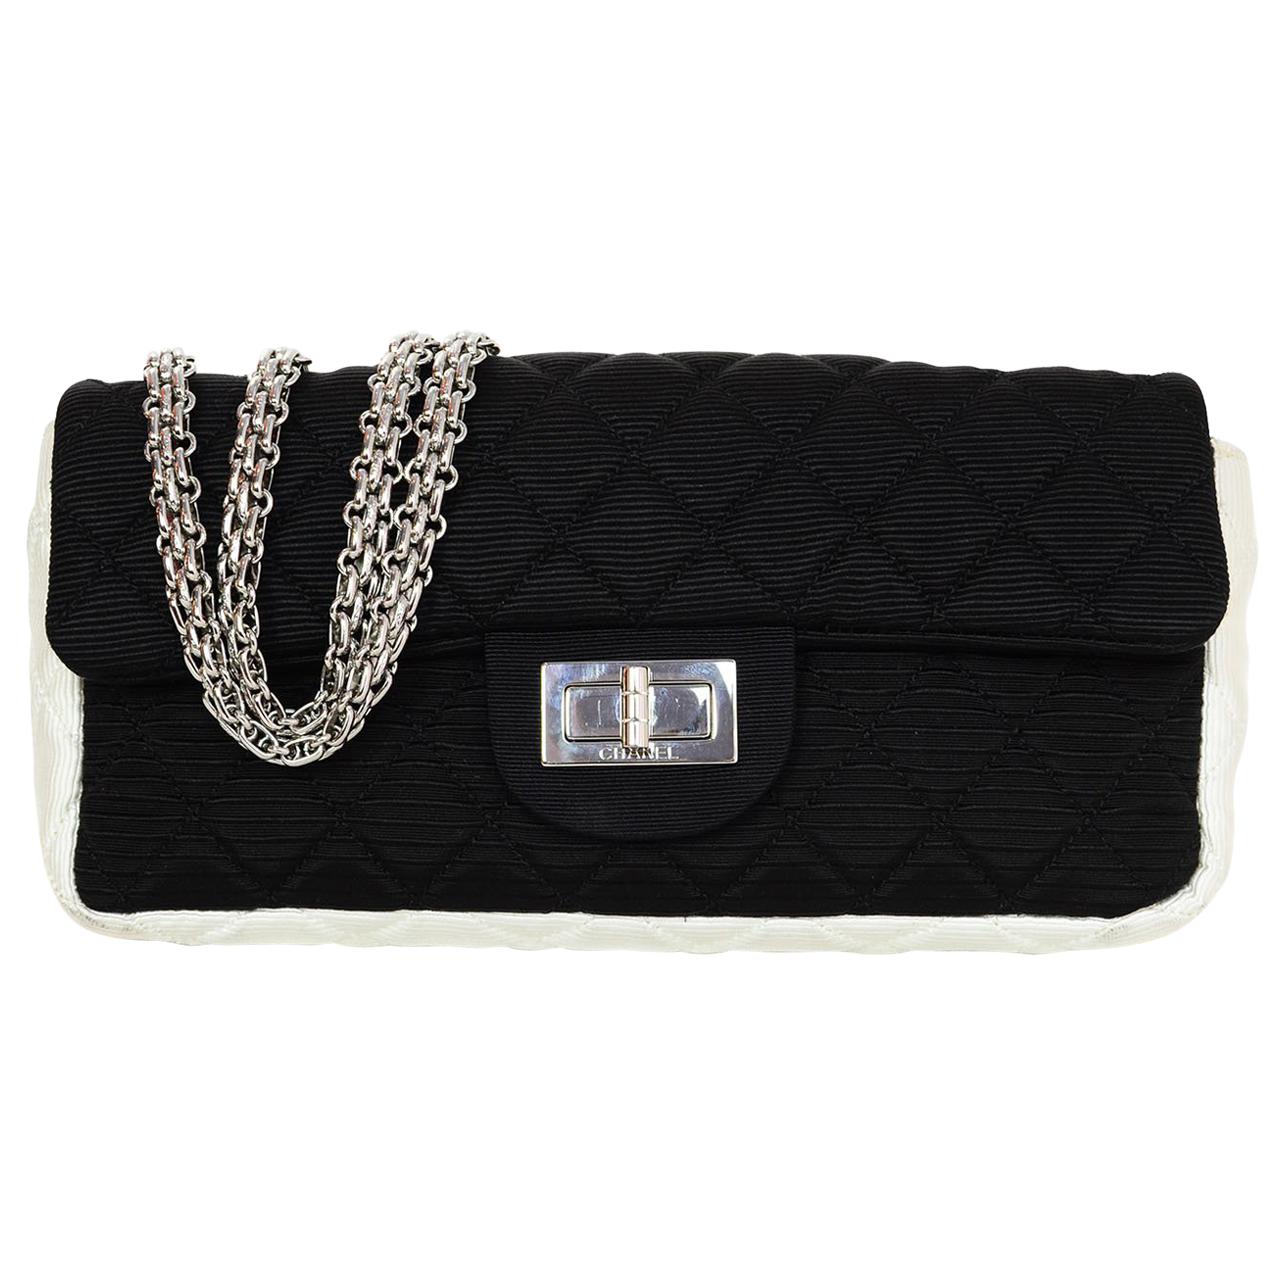 Chanel Black & White Quilted Grosgrain 2.55 Reissue East/West Flap Bag